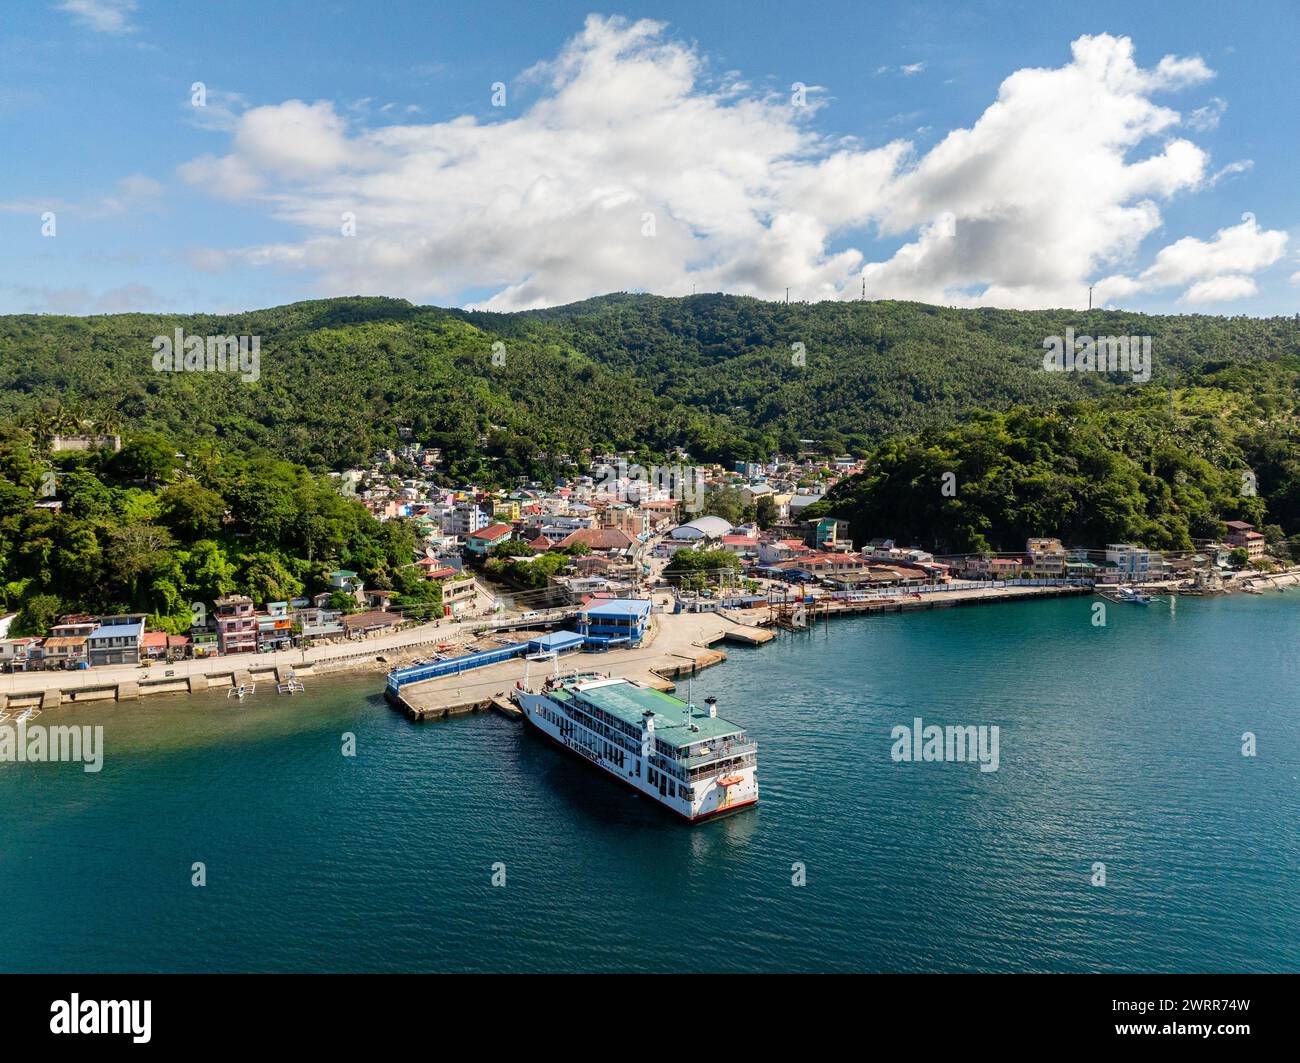 City with buildings and residential area near the coast. Romblon, Philippines. Stock Photo